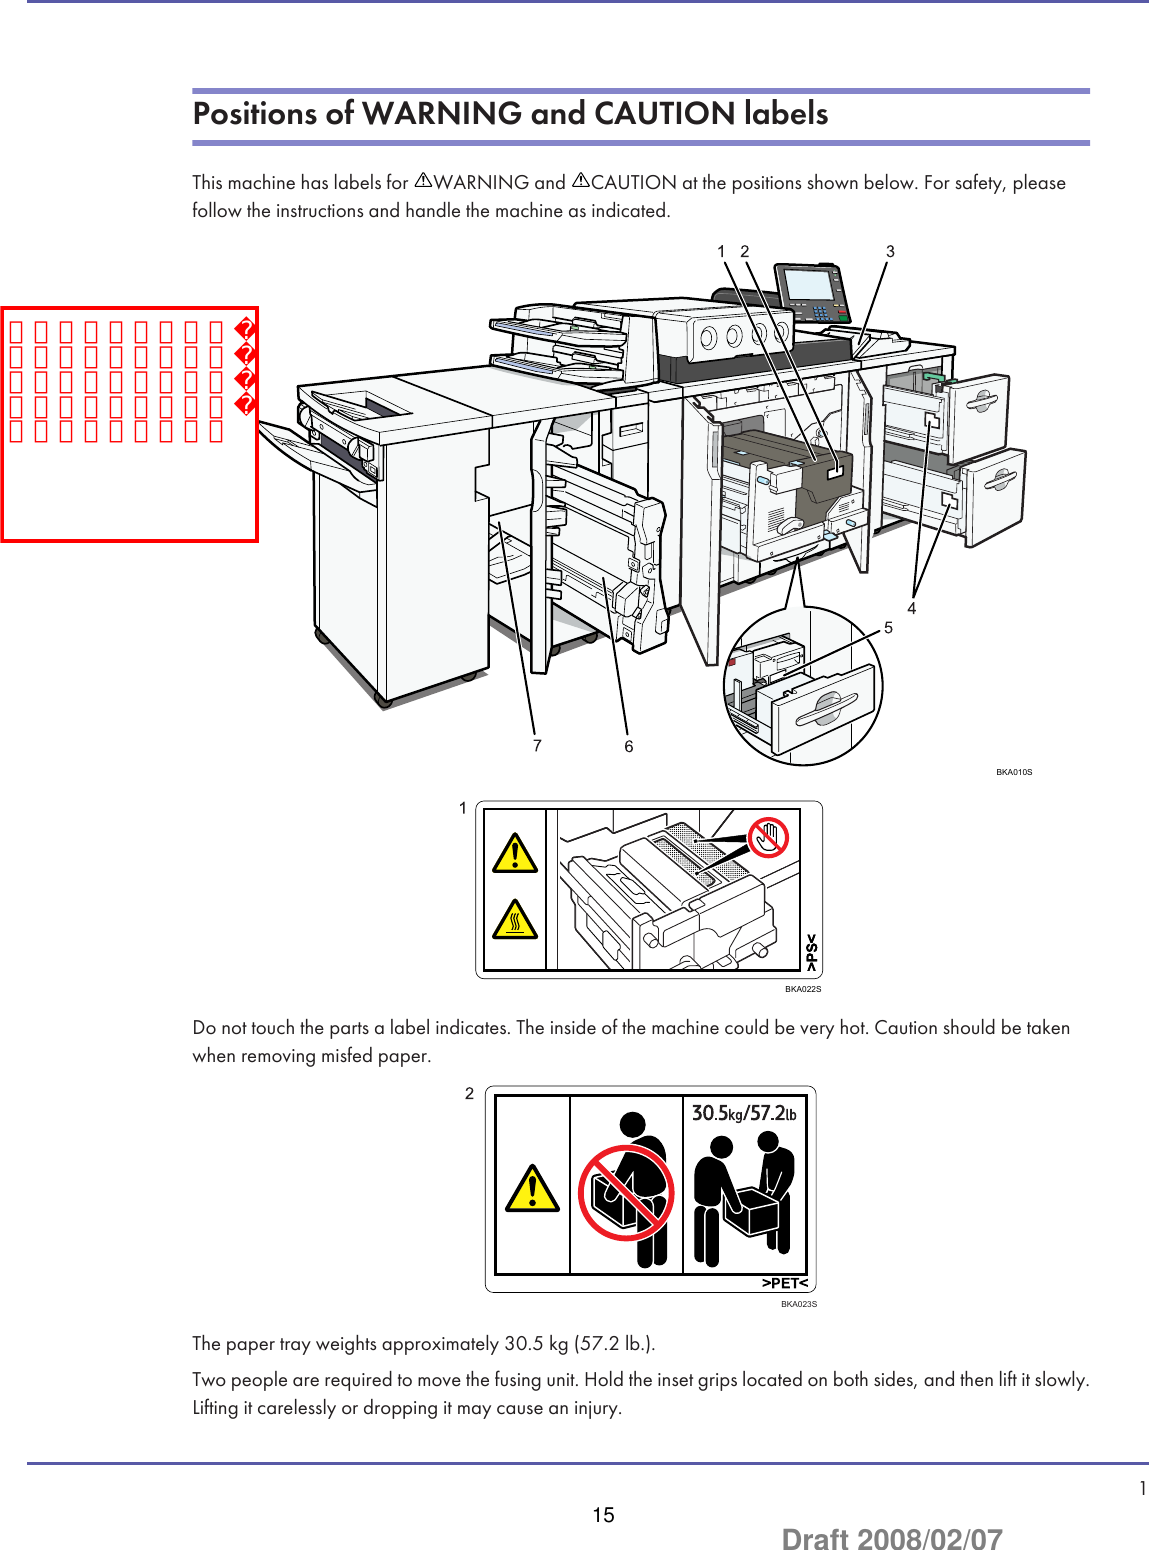 Positions of WARNING and CAUTION labelsThis machine has labels for  WARNING and  CAUTION at the positions shown below. For safety, pleasefollow the instructions and handle the machine as indicated.BKA010SBKA022SDo not touch the parts a label indicates. The inside of the machine could be very hot. Caution should be takenwhen removing misfed paper.BKA023SThe paper tray weights approximately 30.5 kg (57.2 lb.).Two people are required to move the fusing unit. Hold the inset grips located on both sides, and then lift it slowly.Lifting it carelessly or dropping it may cause an injury.   1注意・警告デカルの貼り付け箇所に間違い、または追加・変更等がありましたらお知らせください。15Draft 2008/02/07